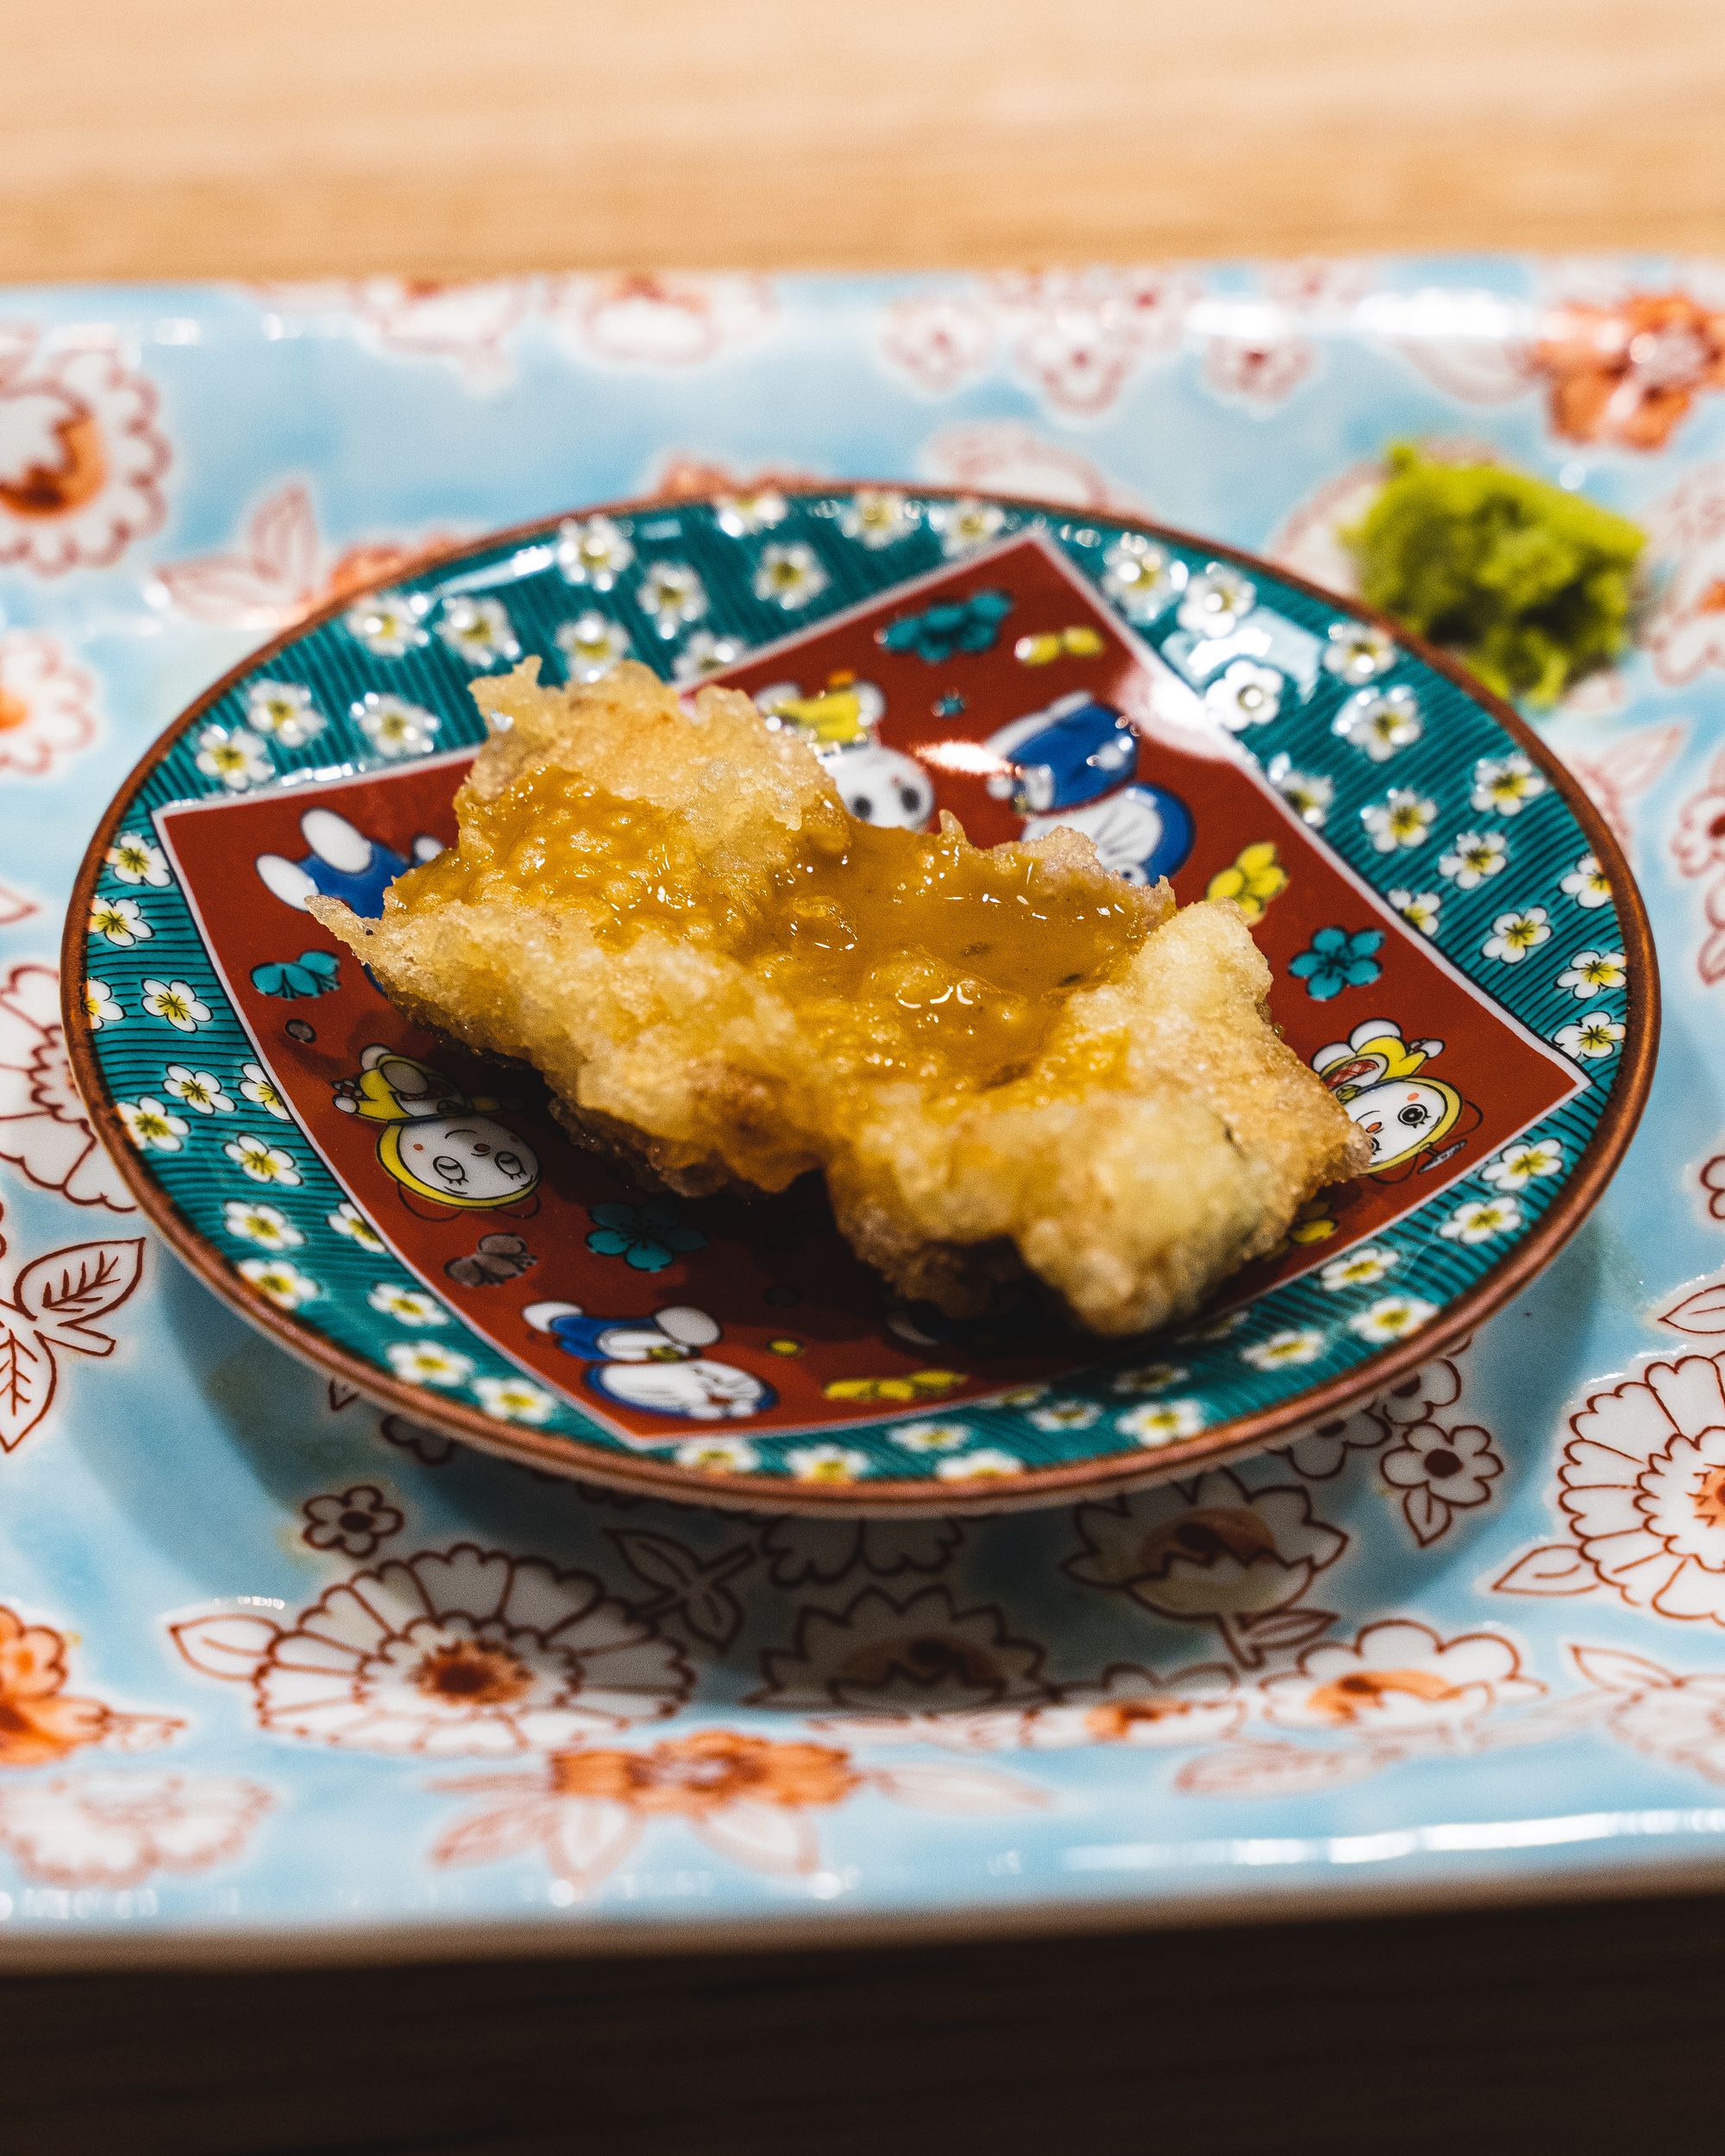 Fried anago with uni sauce